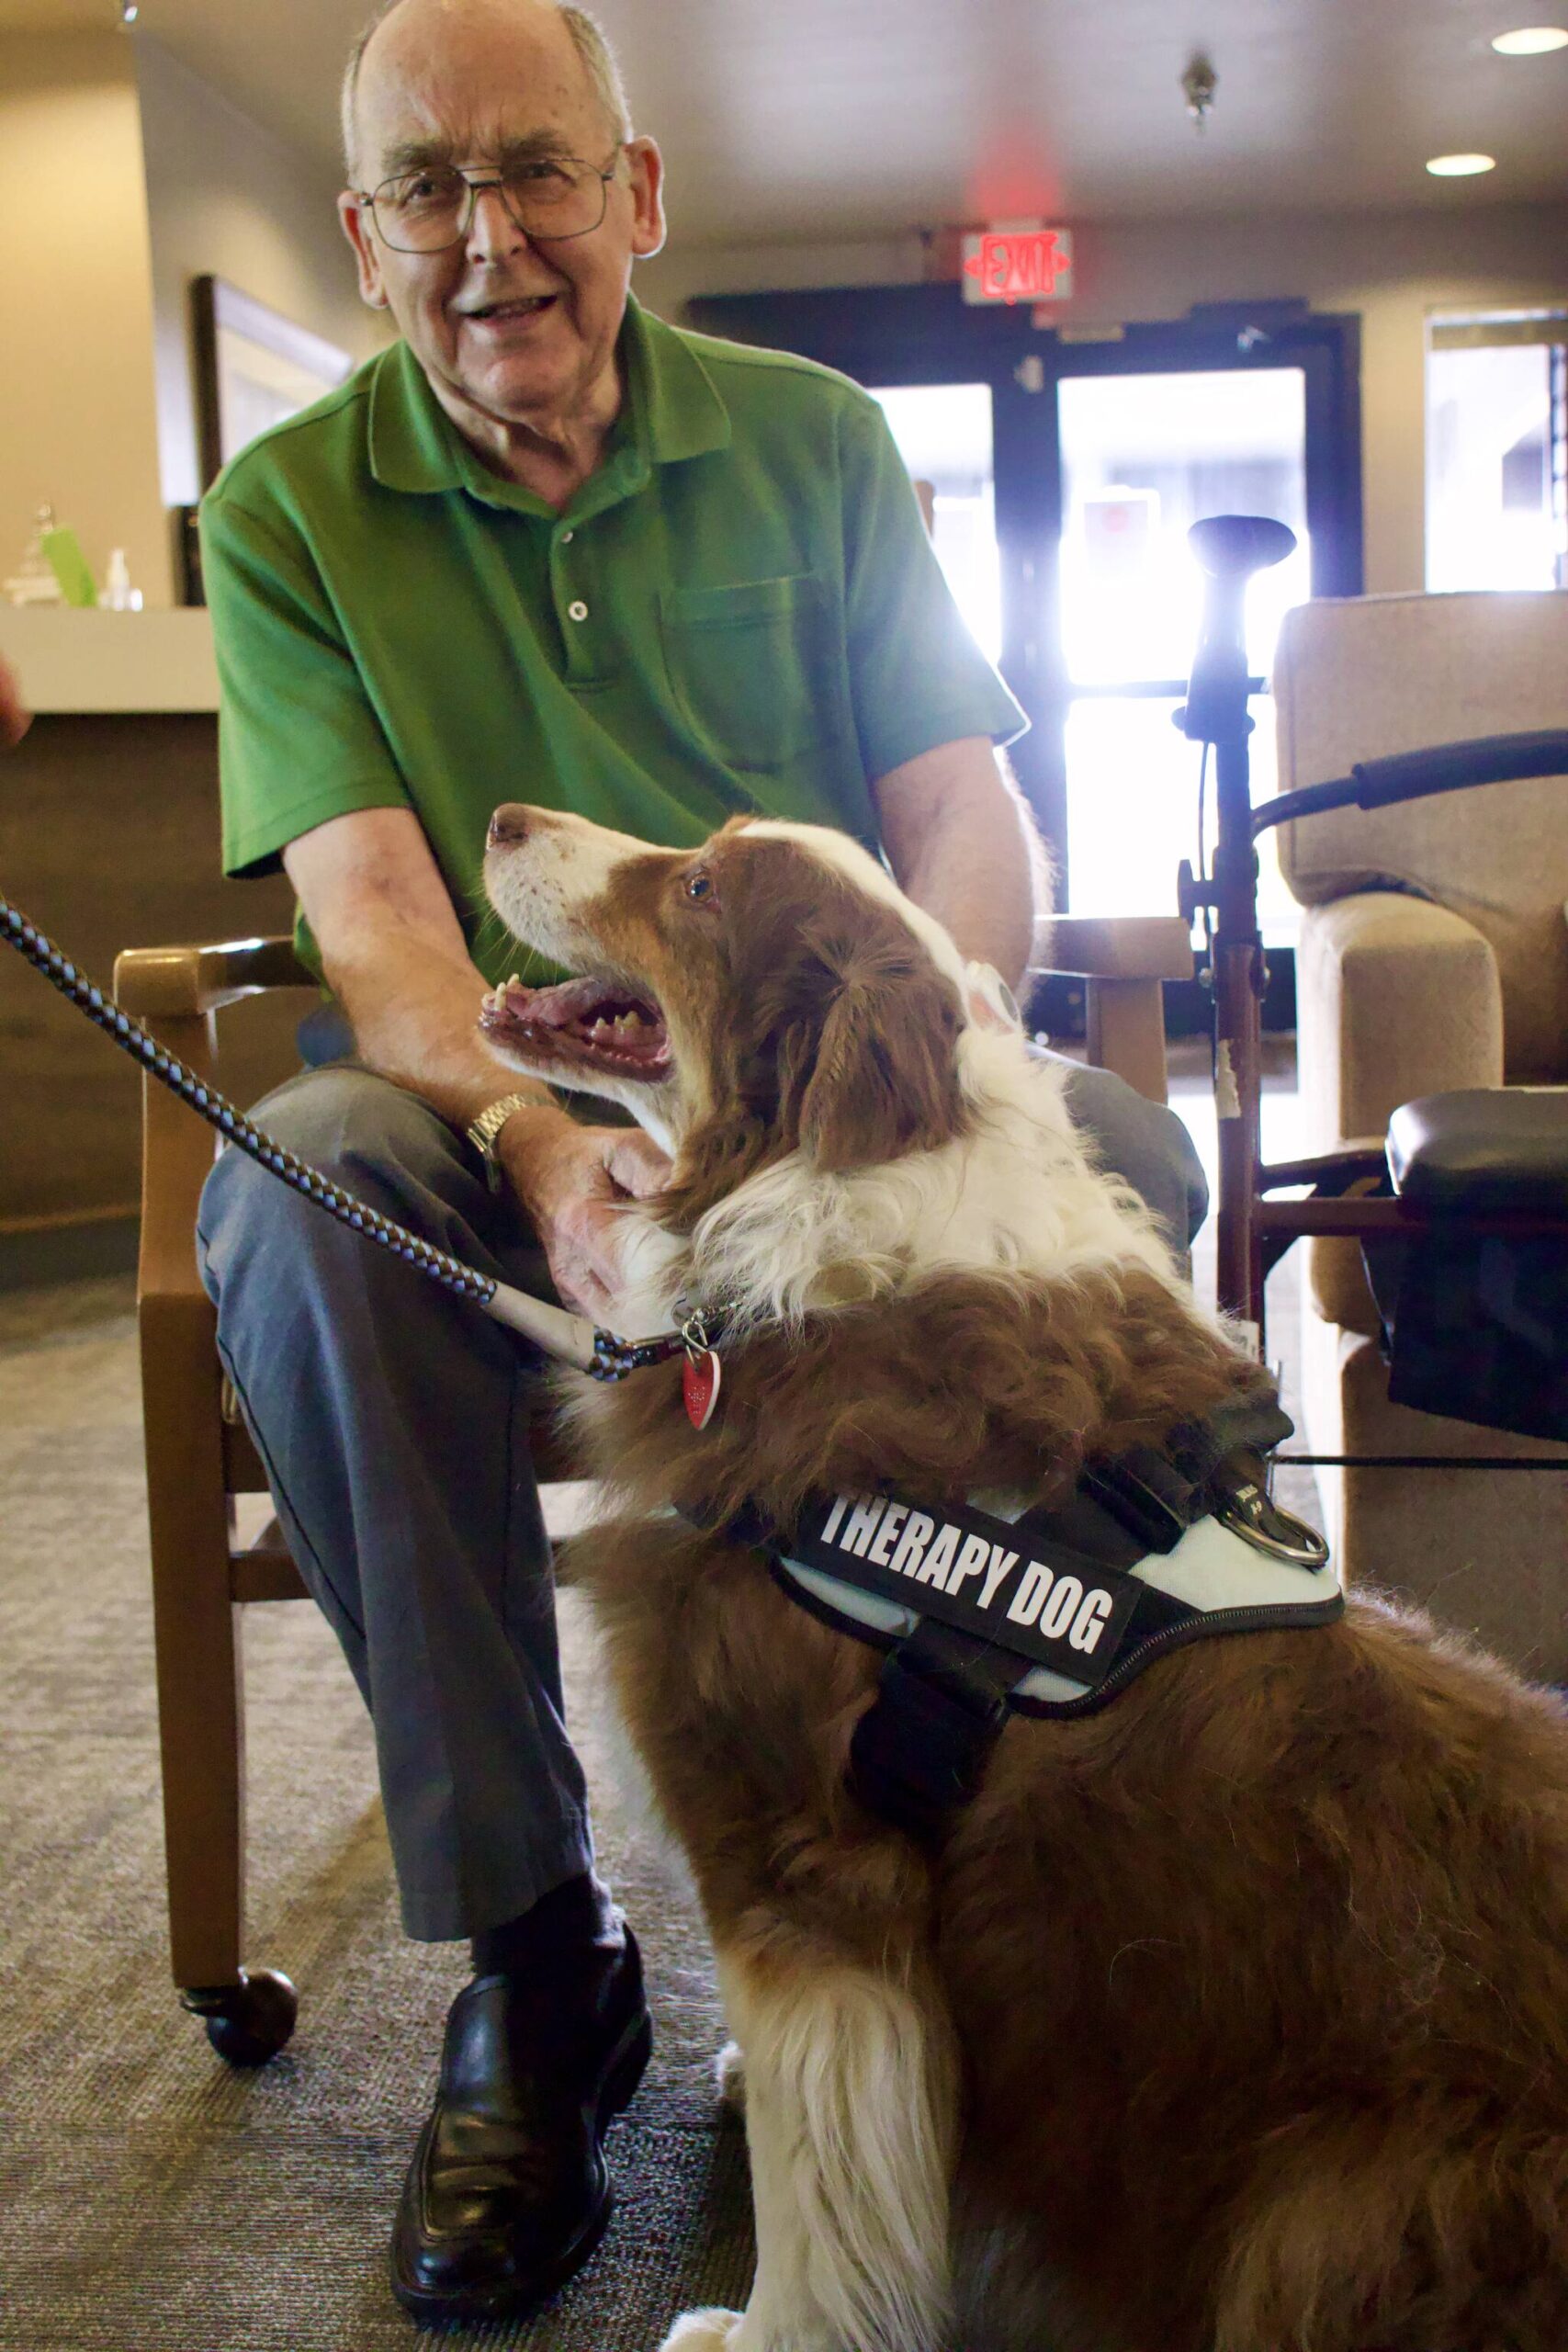 Photo by Rachel Rosen/Whidbey News-Times
Bob Swetnam spends time with Dillon, a 12-year-old Austrailian Shepherd.